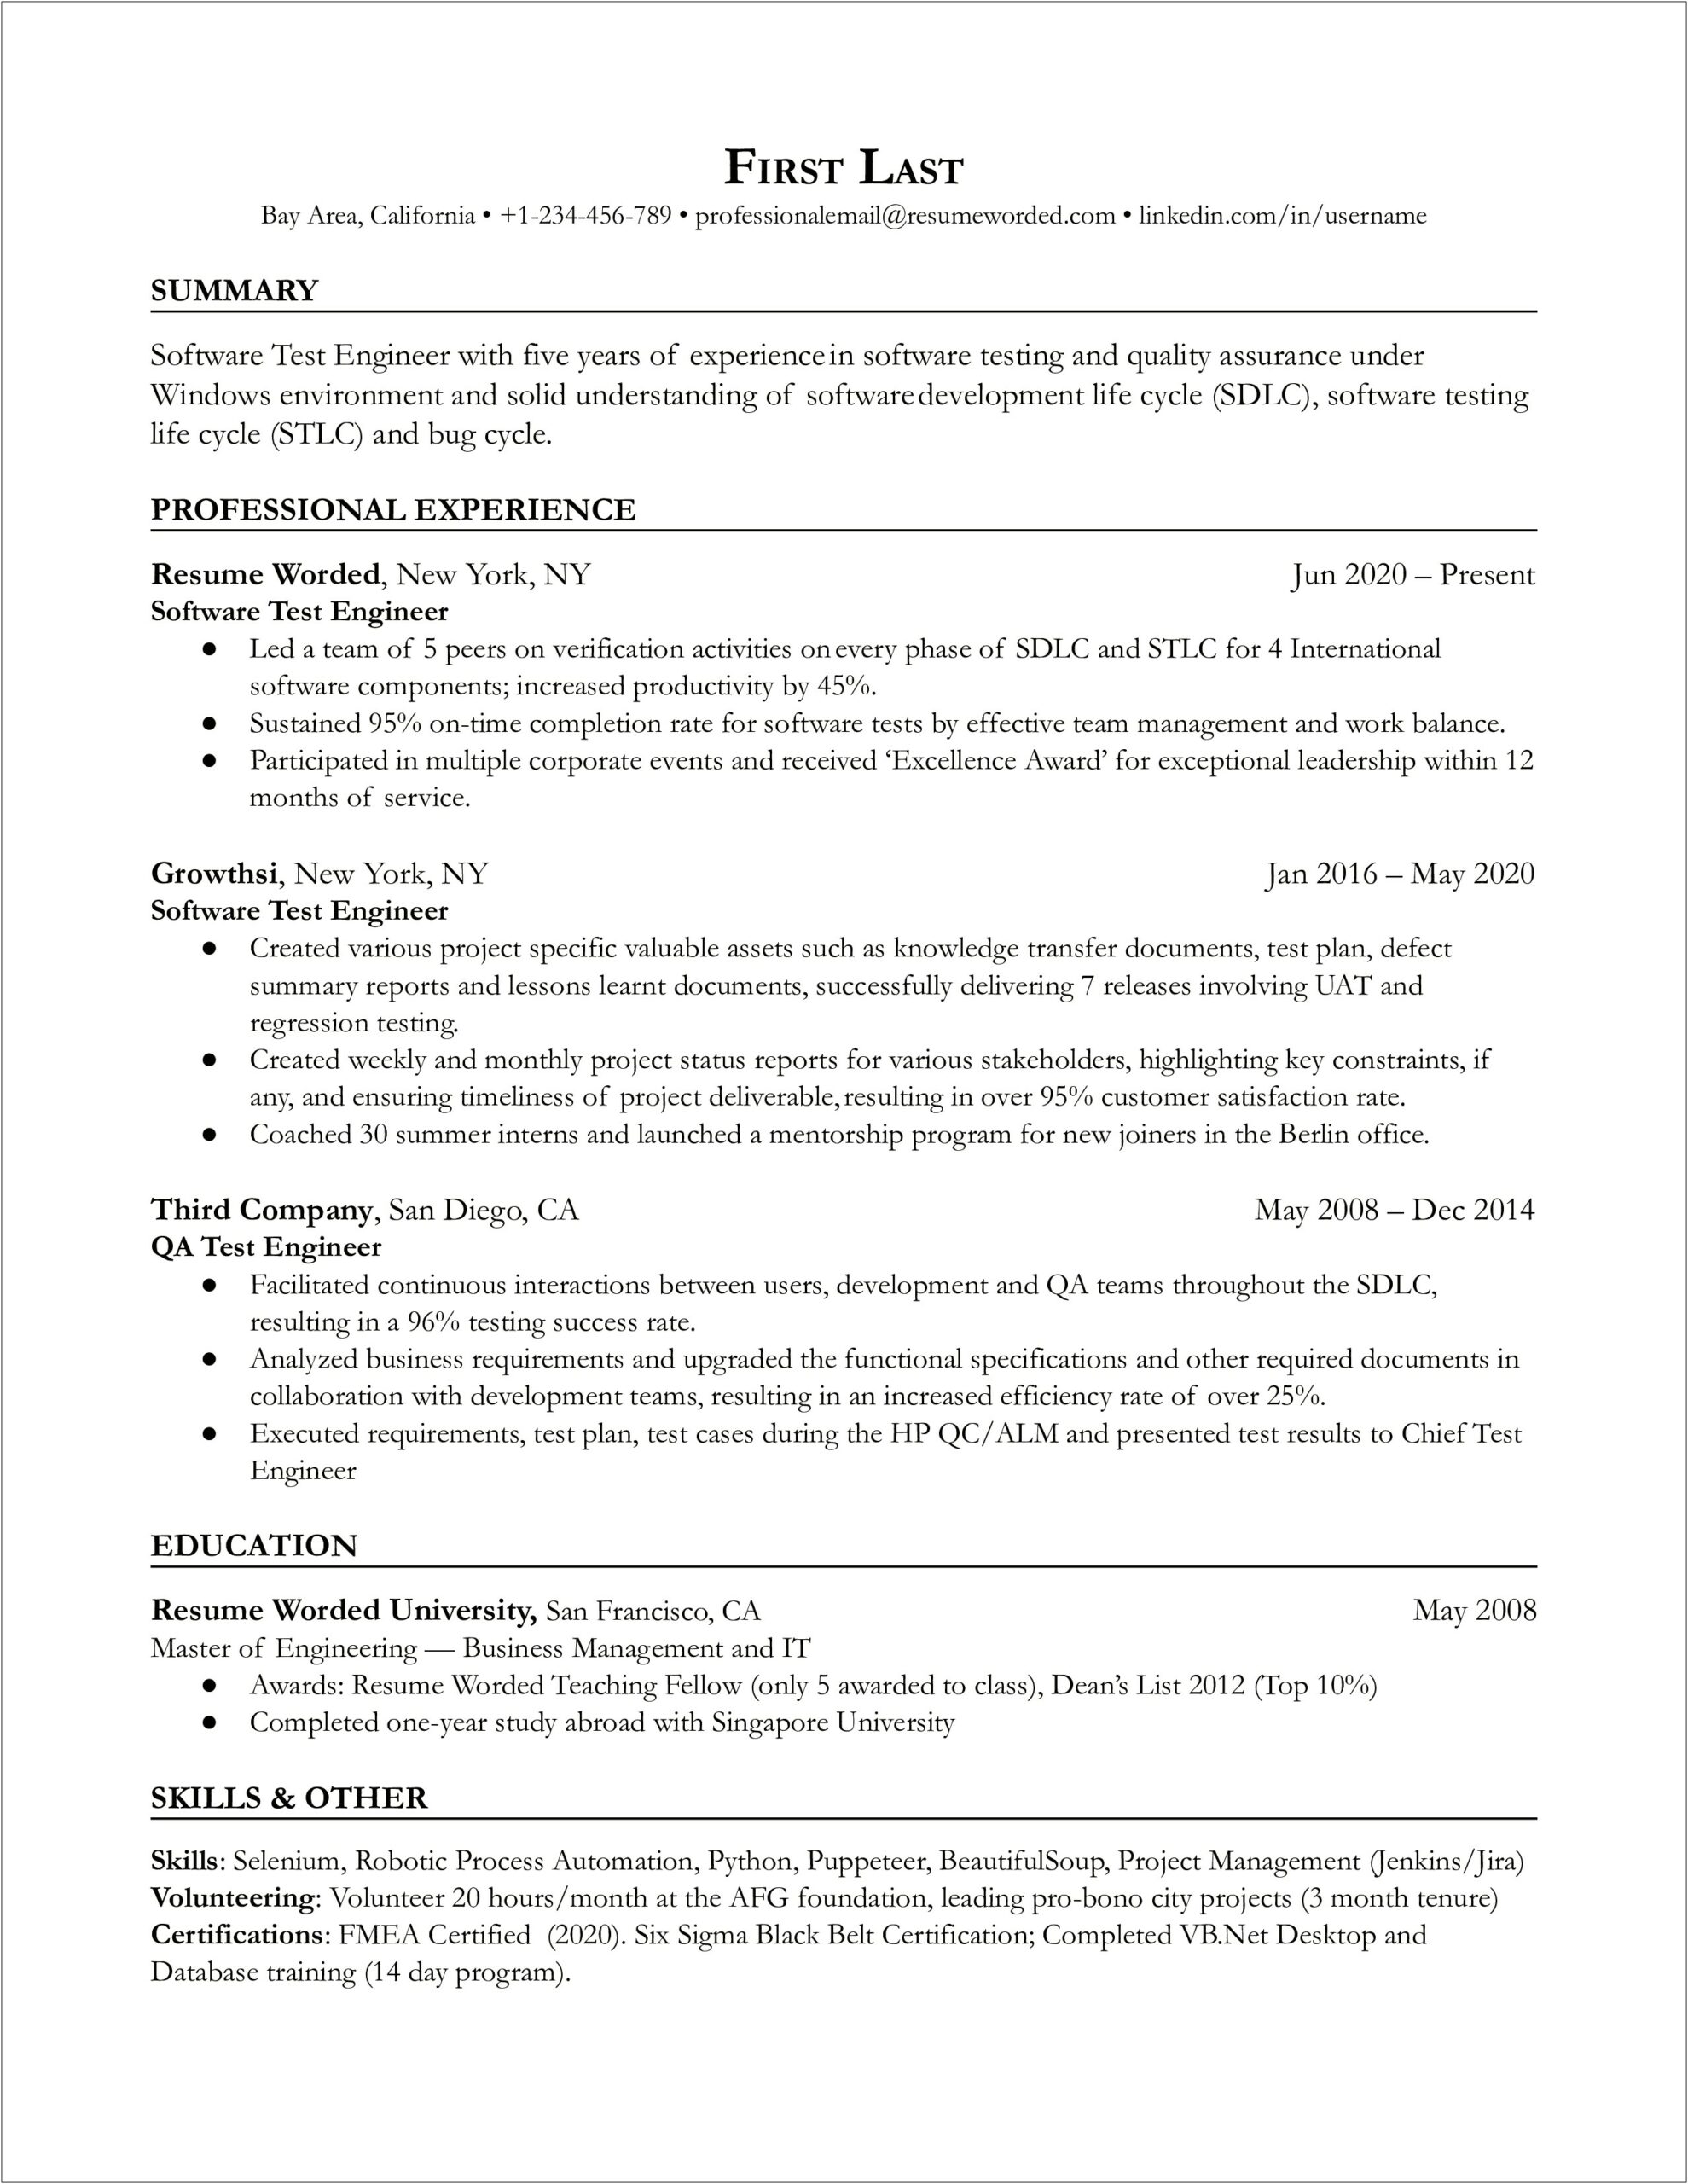 Manual Testing Resume Sample For 5 Years Experience